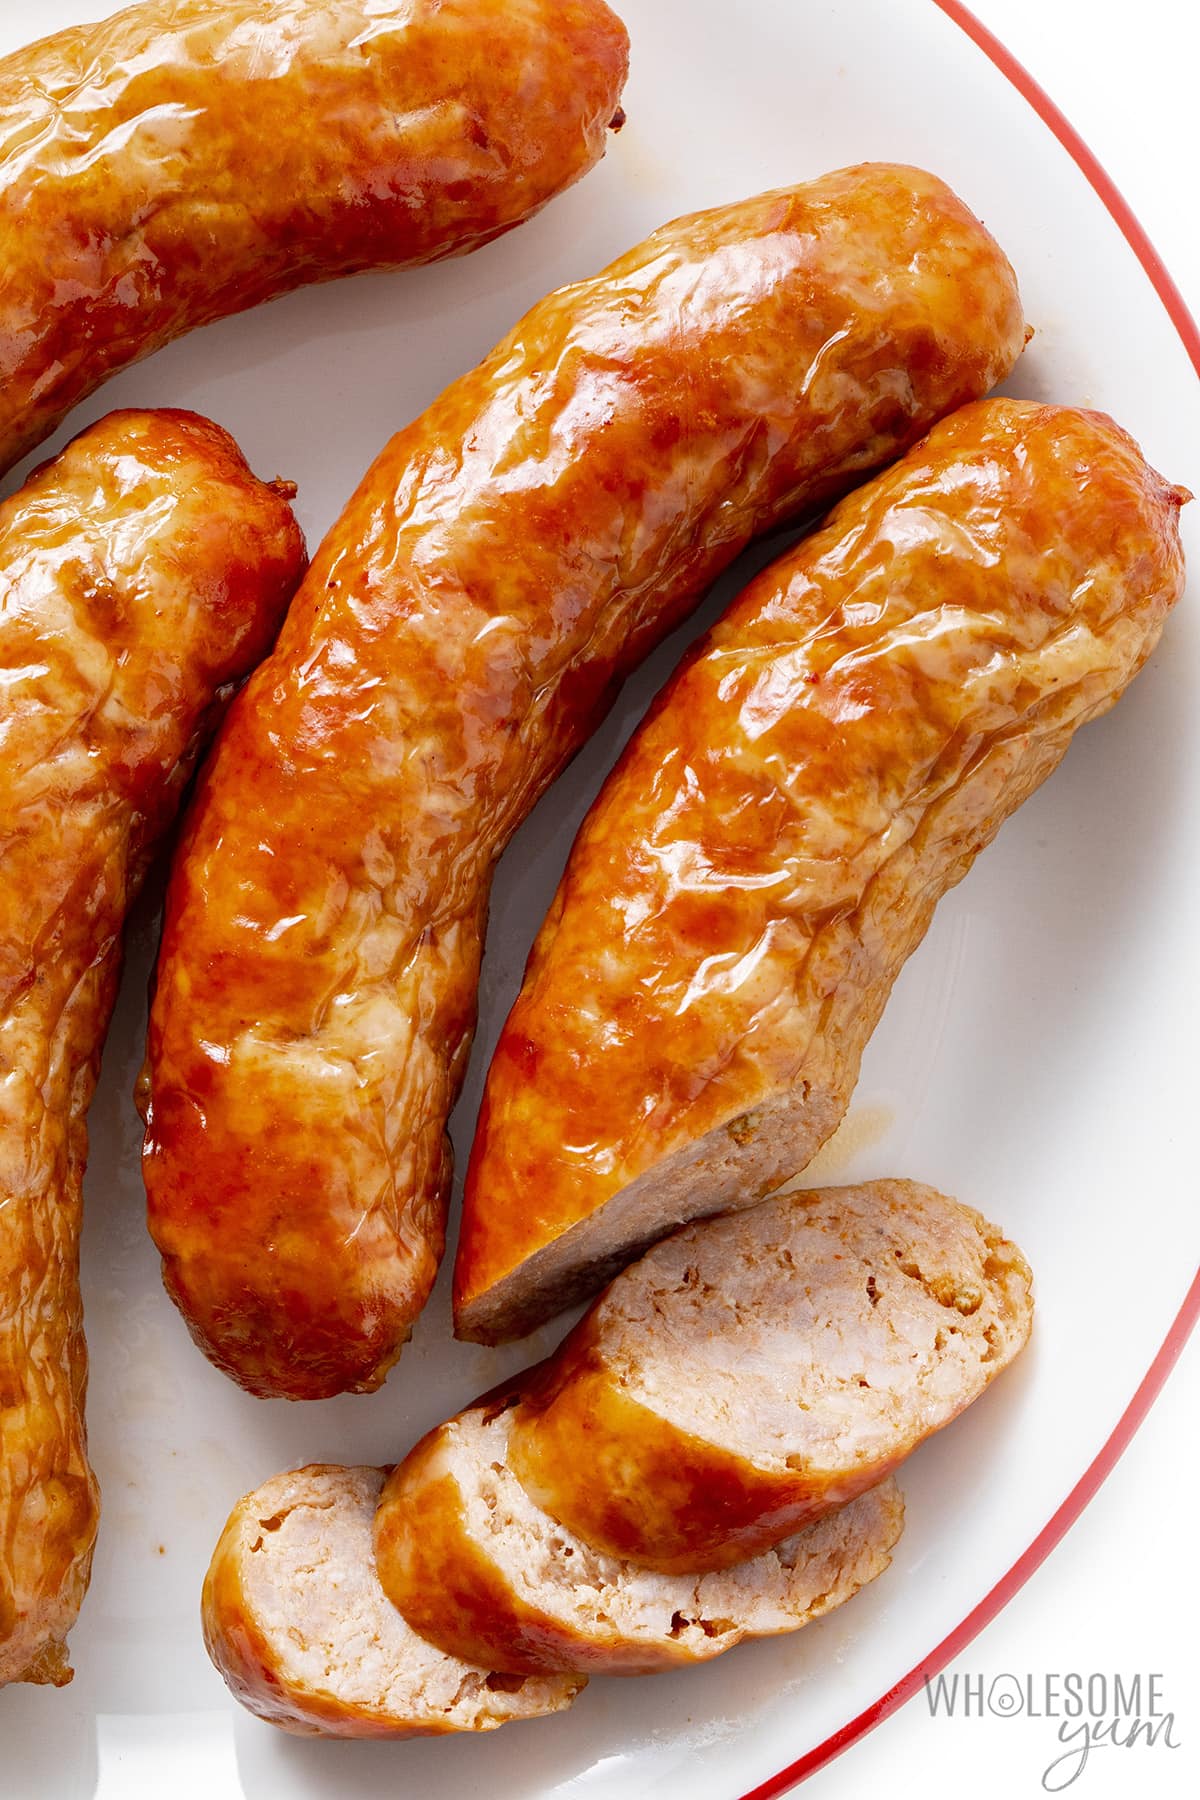 Sliced air fryer sausage on a plate.